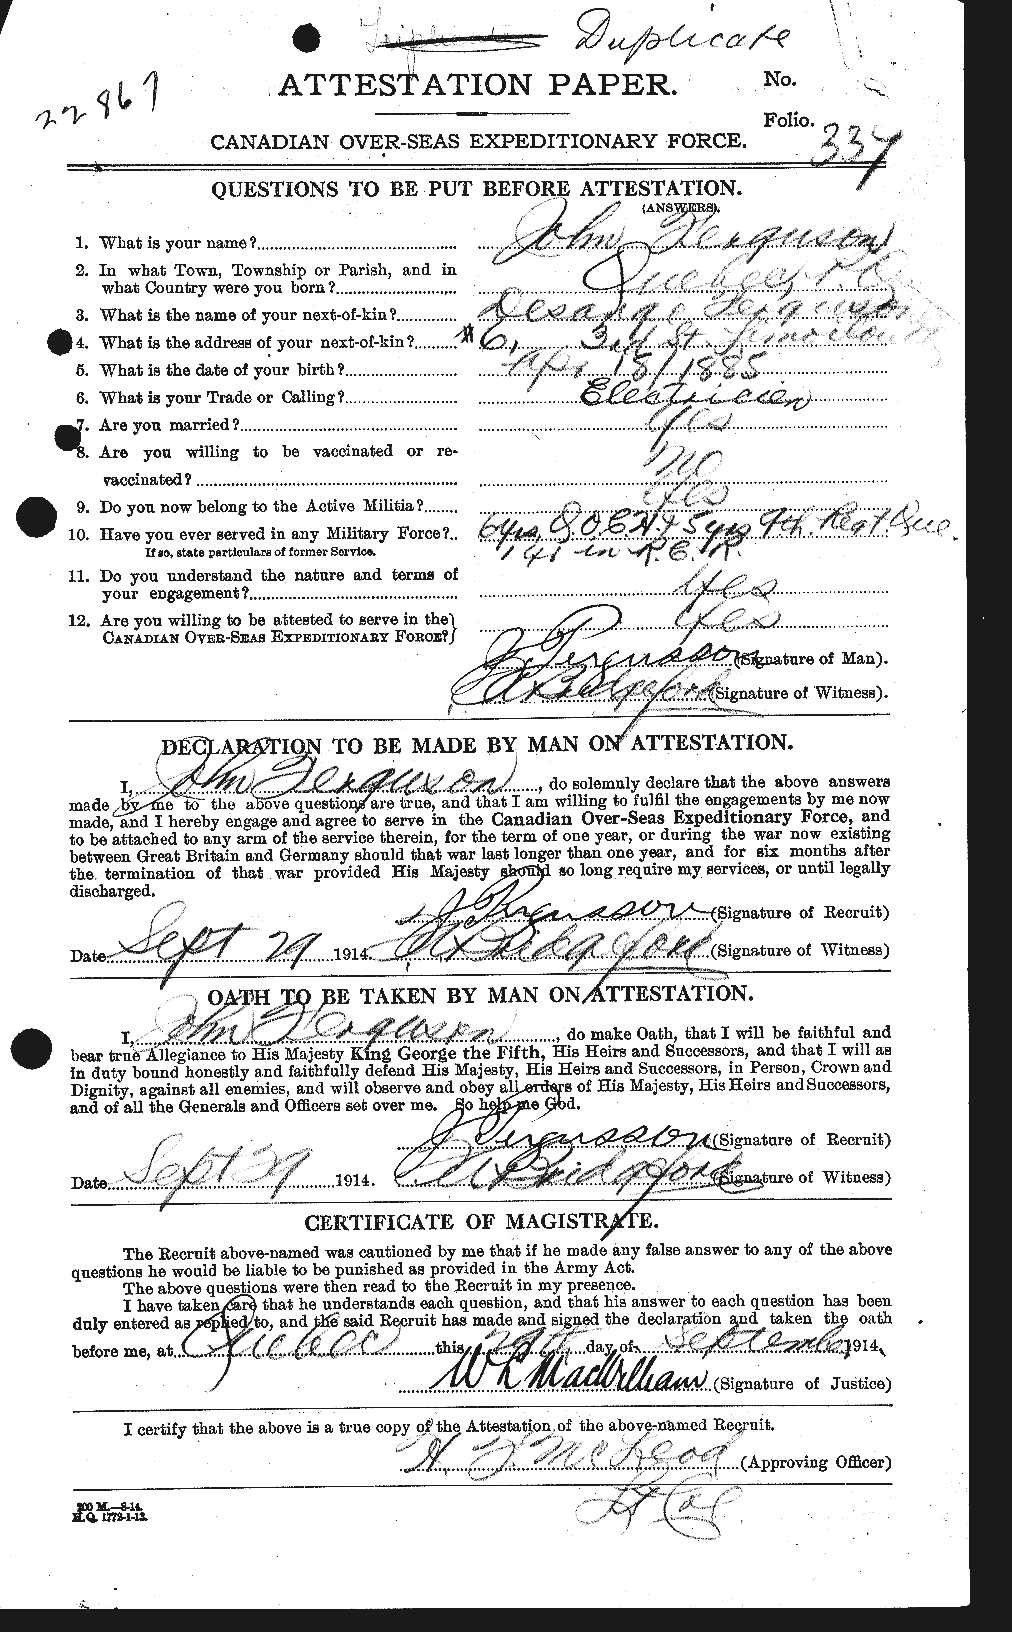 Personnel Records of the First World War - CEF 320303a